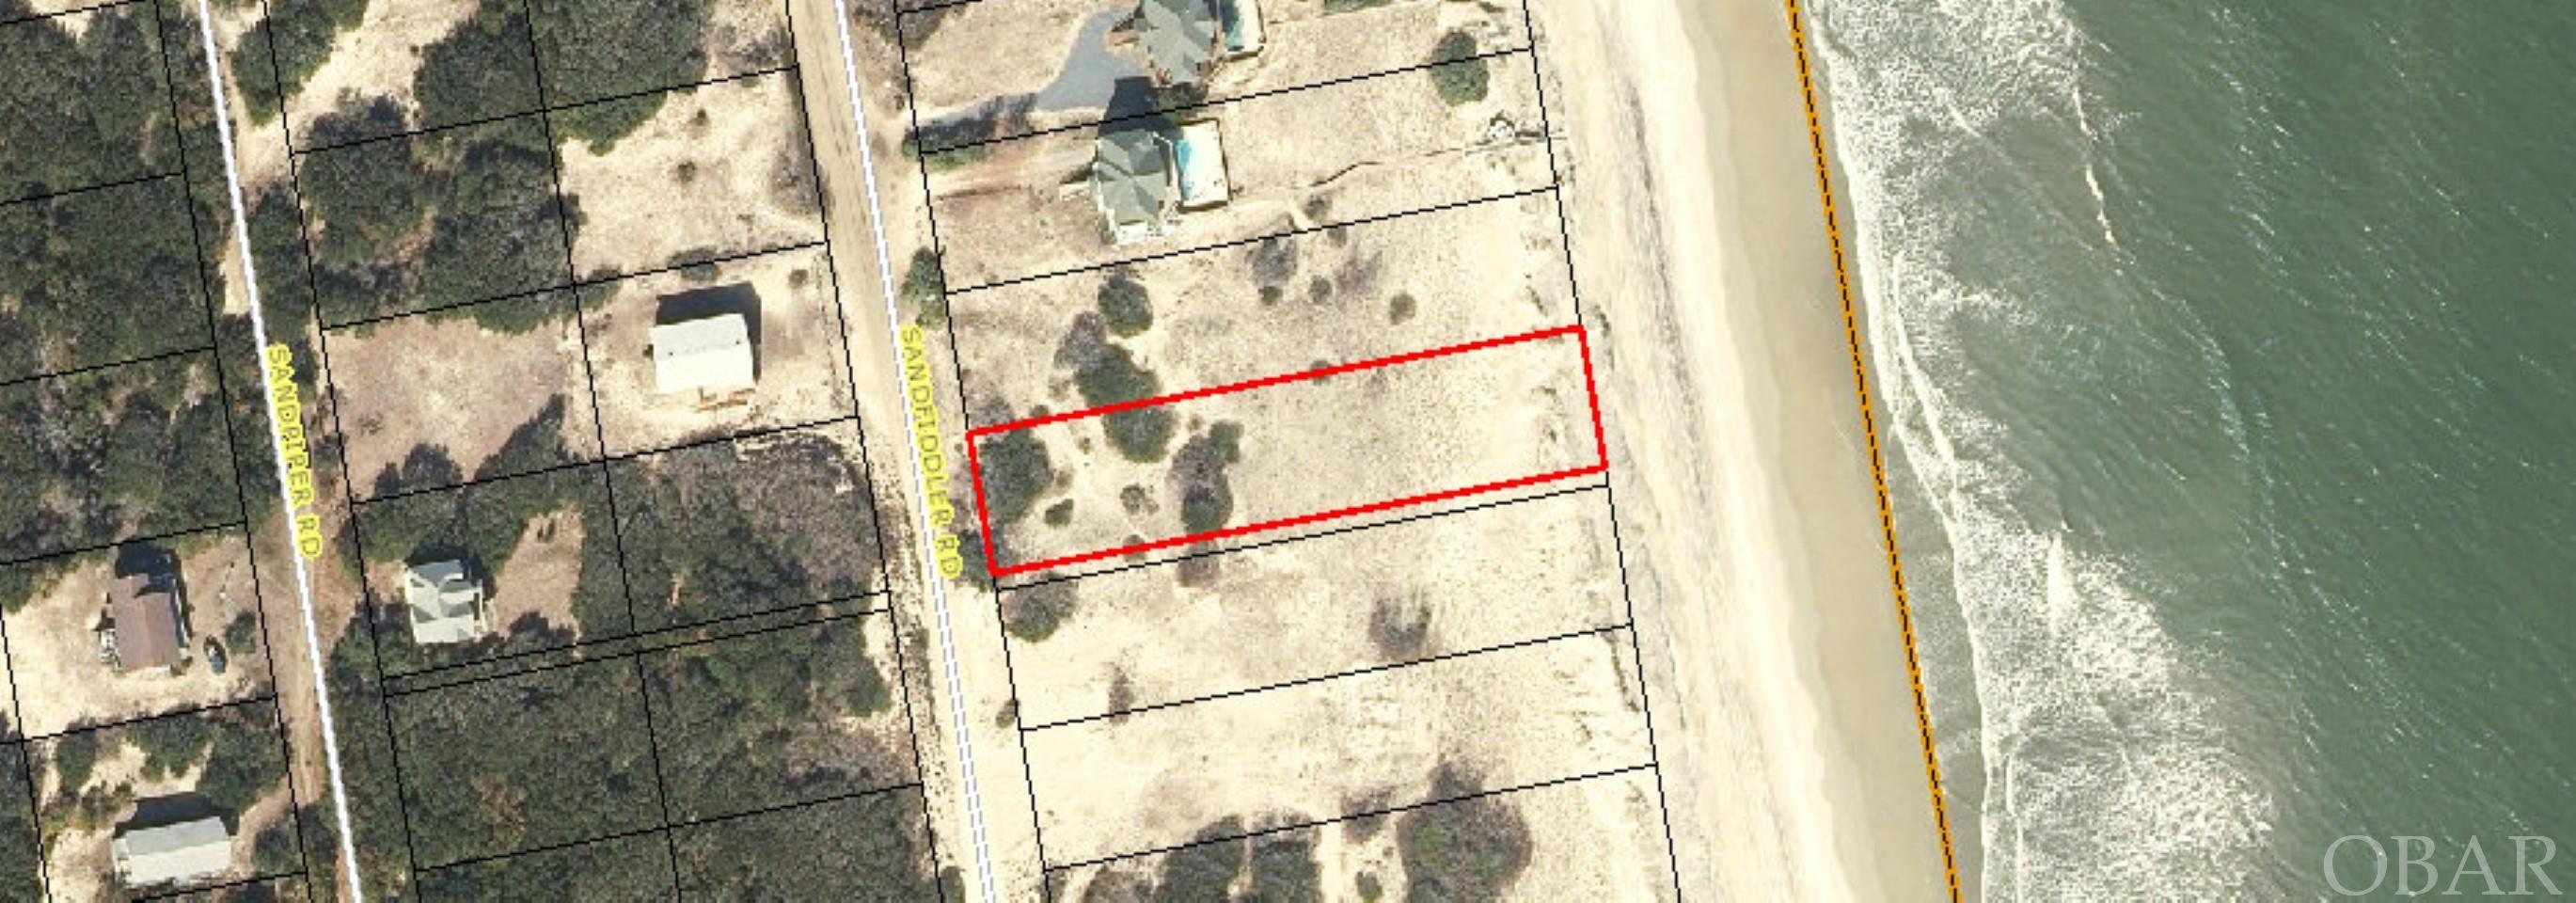 This is an UNREAL oceanfront lot.  Almost entire buildable envelope in the x flood zone and an unbelievable amount of sand and elevation.  Great ocean views just standing on the lot!  This would be a perfect HUGE-VIEW site to maximize a rental home return or use as a personal home and have views from every level of your future beach house.  Located on the secluded North end, this is an absolute gem. This type of oceanfront doesn't come around very often.